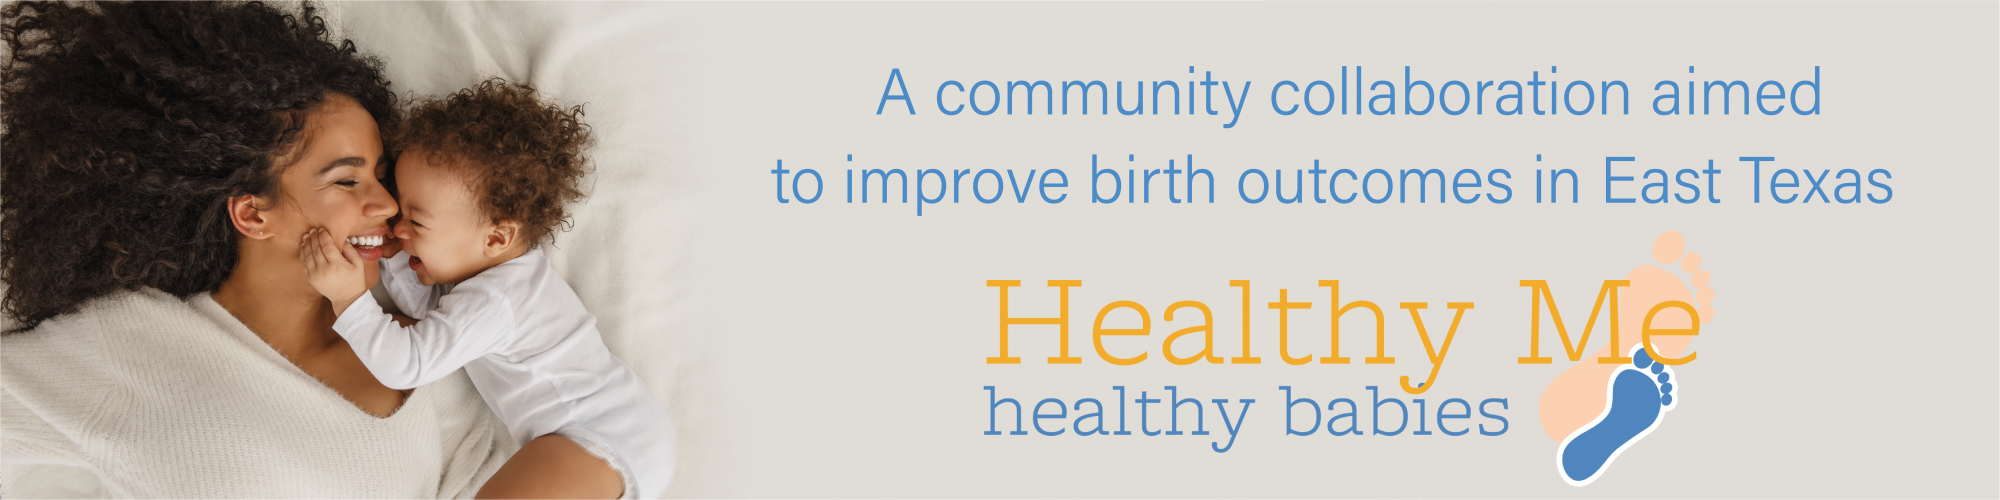 Engage with Parents and Health Leaders Working to Support Our Youngest Citizens